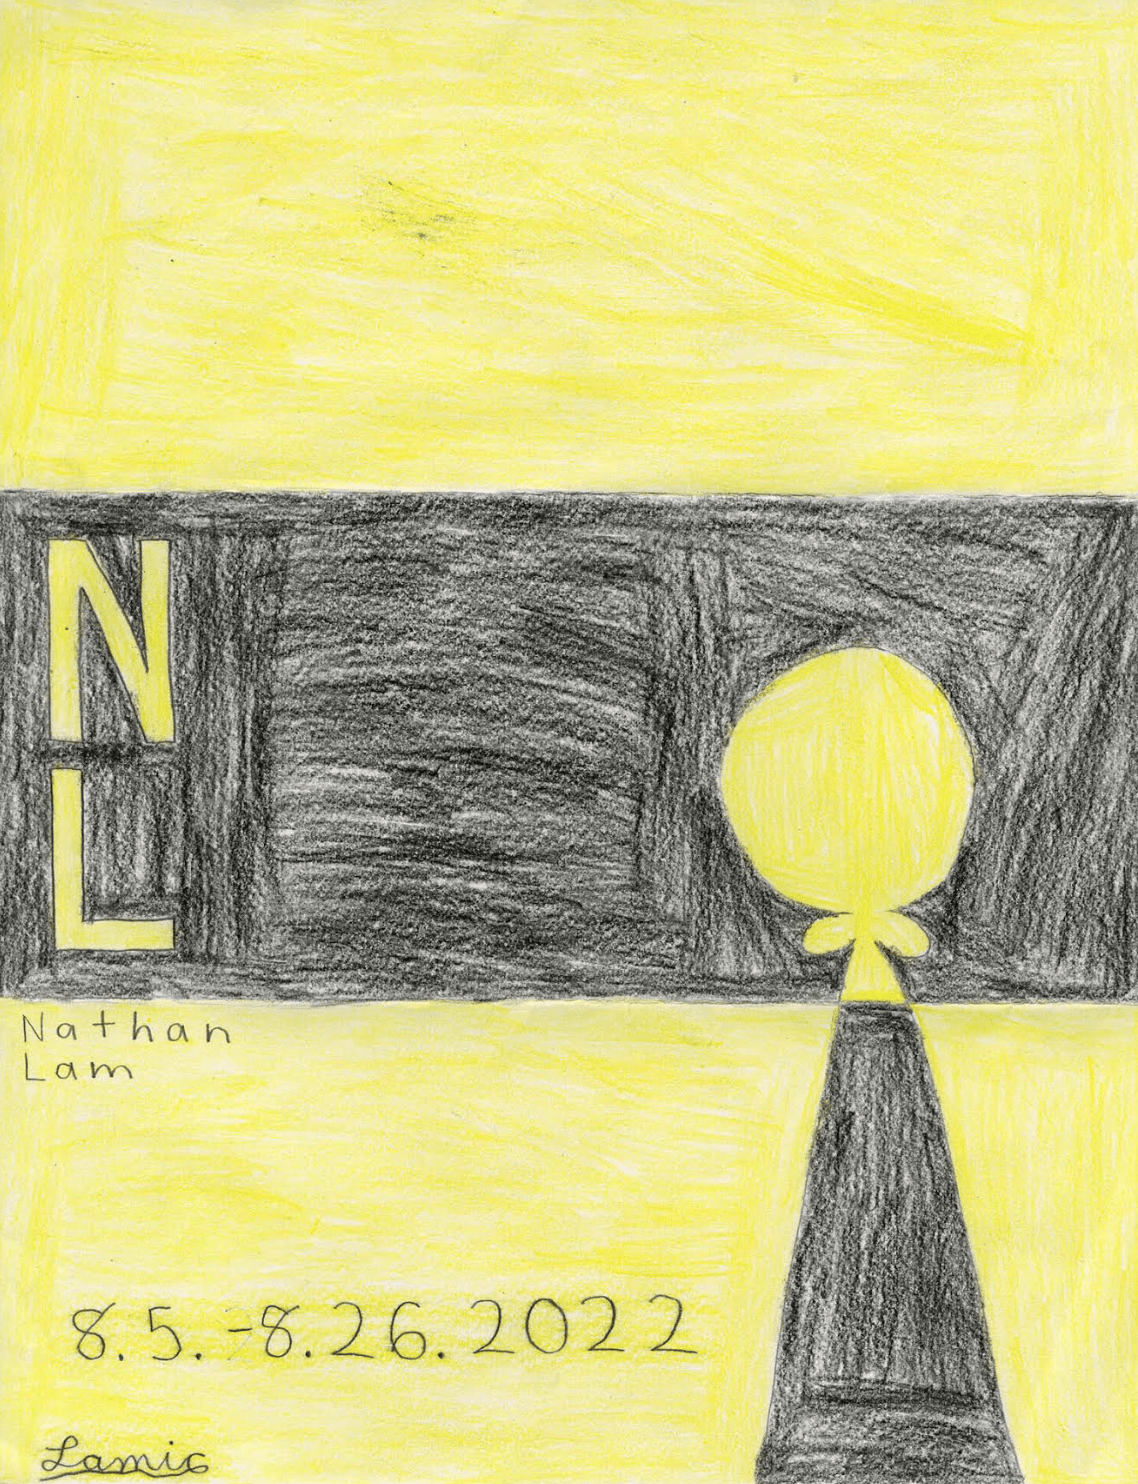 an exhibition flyer in pencil: a black stripe in the middle with yellow letters "N" and "L", and a yellow cartoon figure. Yellow stripes above and below. The figure casts a black shadow on the yellow stripe below. The exhibition dates and artist's name is in the bottom left corner.